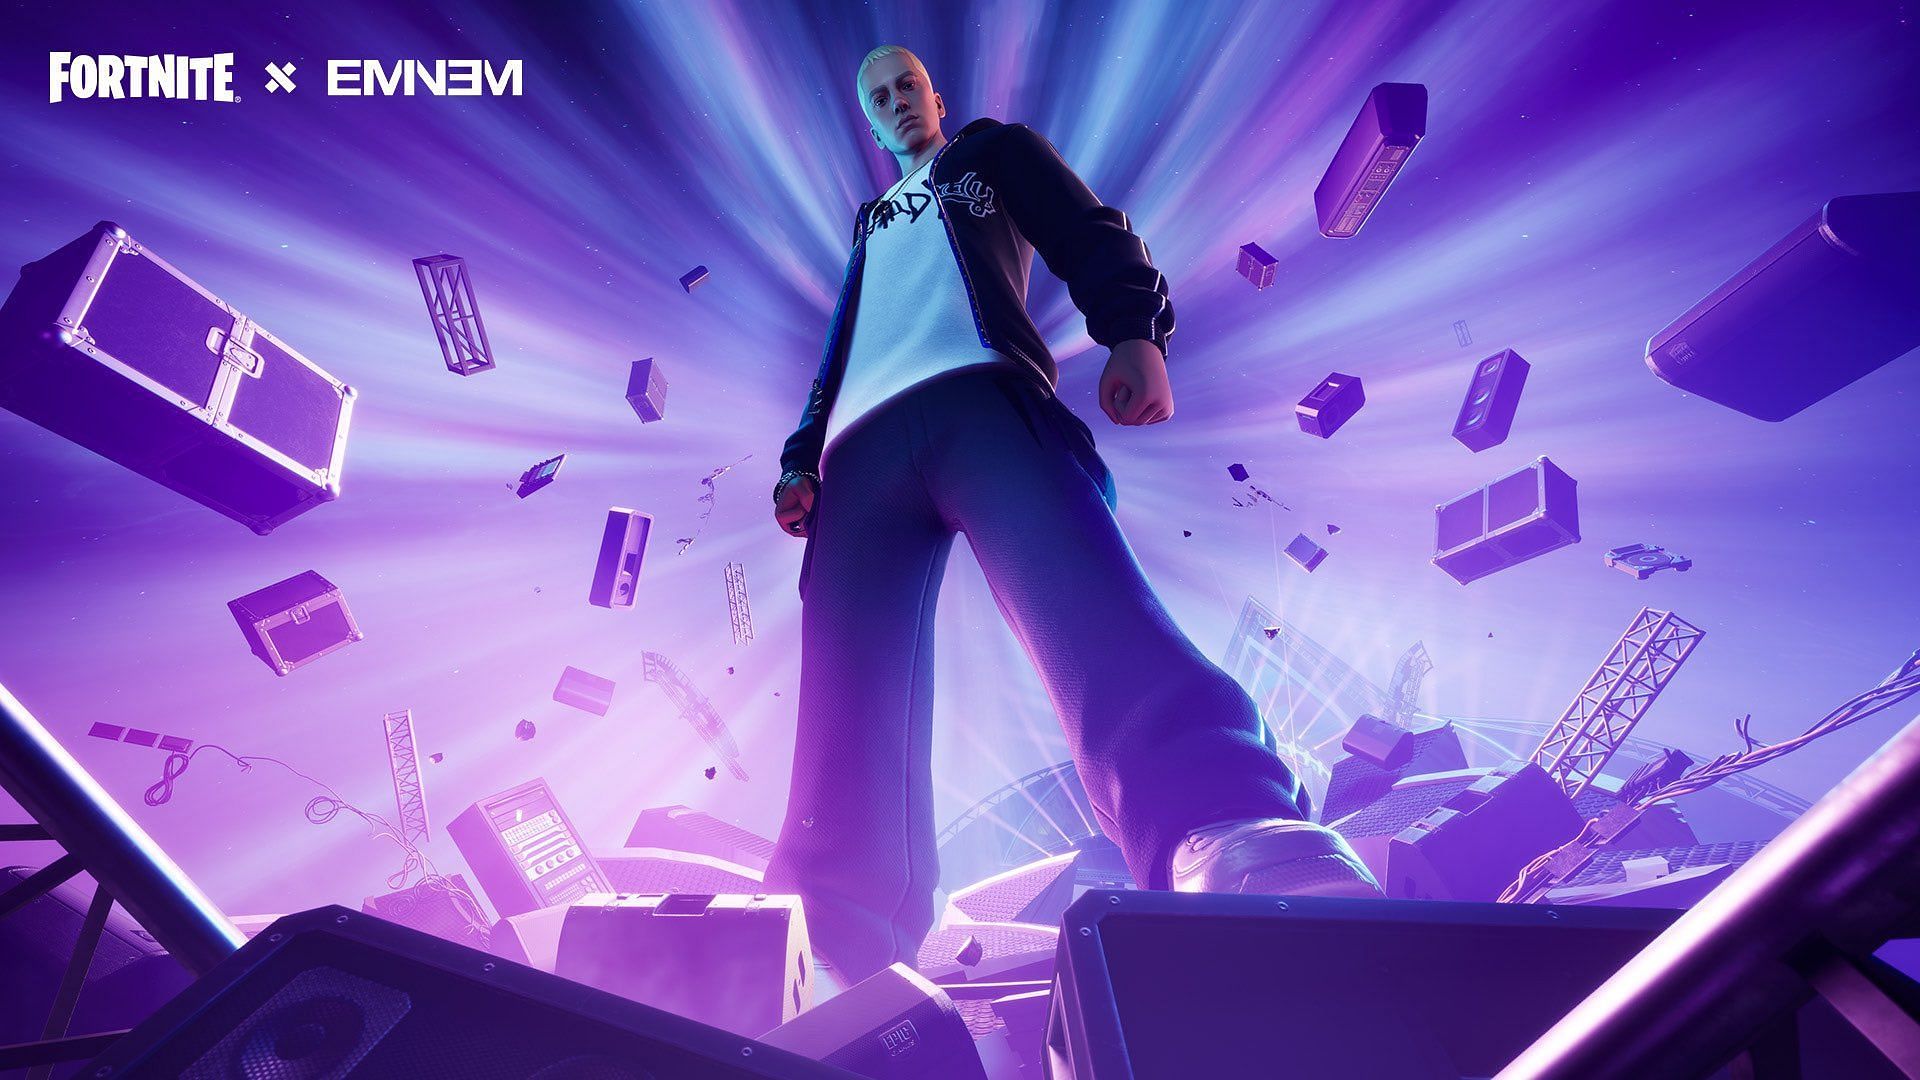 How much did Eminem make from the Fortnite live event? Expected earnings explored